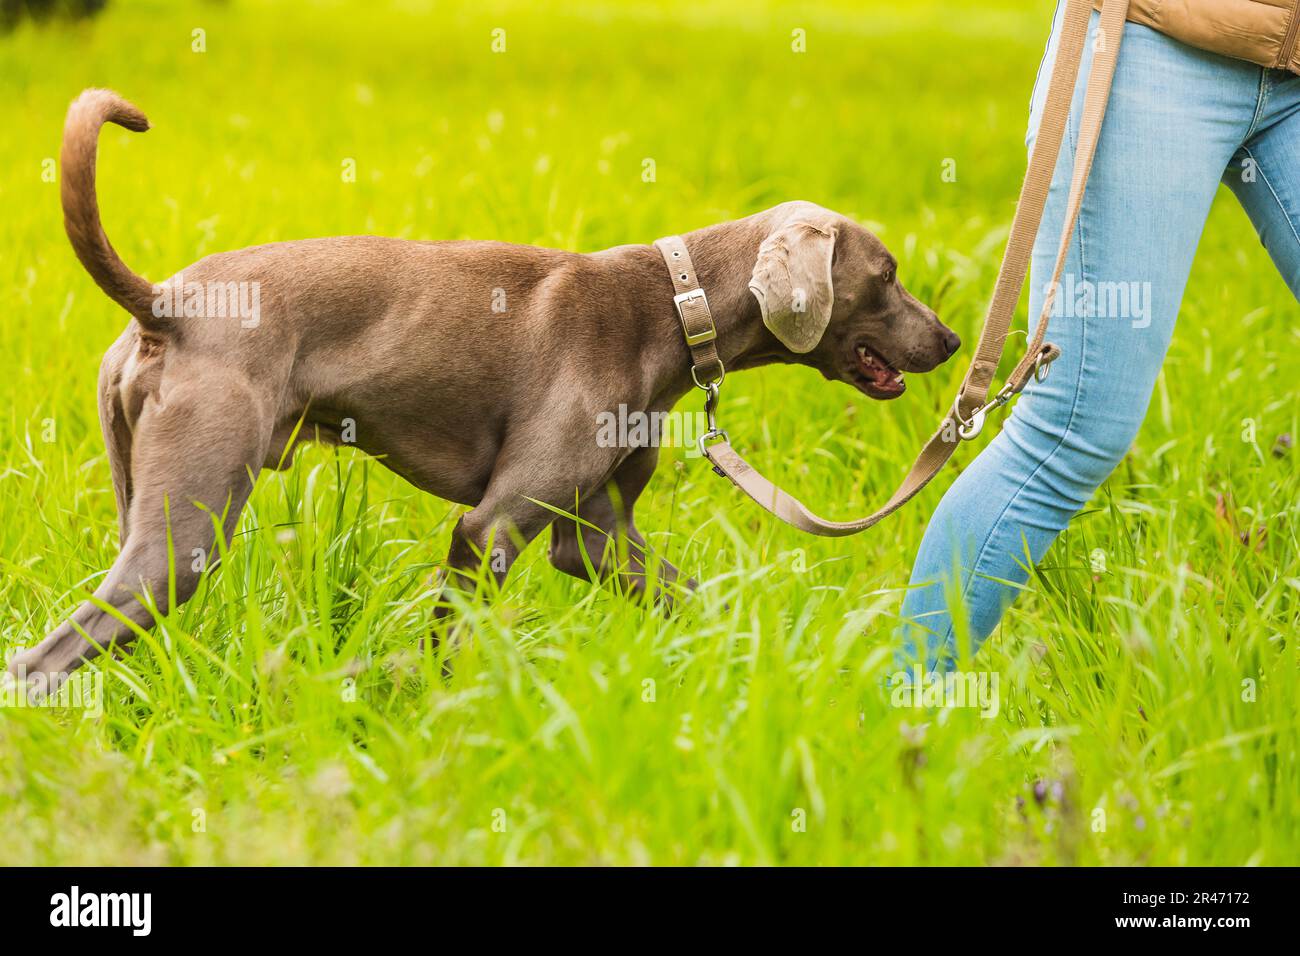 Weimaraner dog on leash with owner. Cut that makes the woman unrecognizable. Park with footpath and green lawn and bright light. Stock Photo